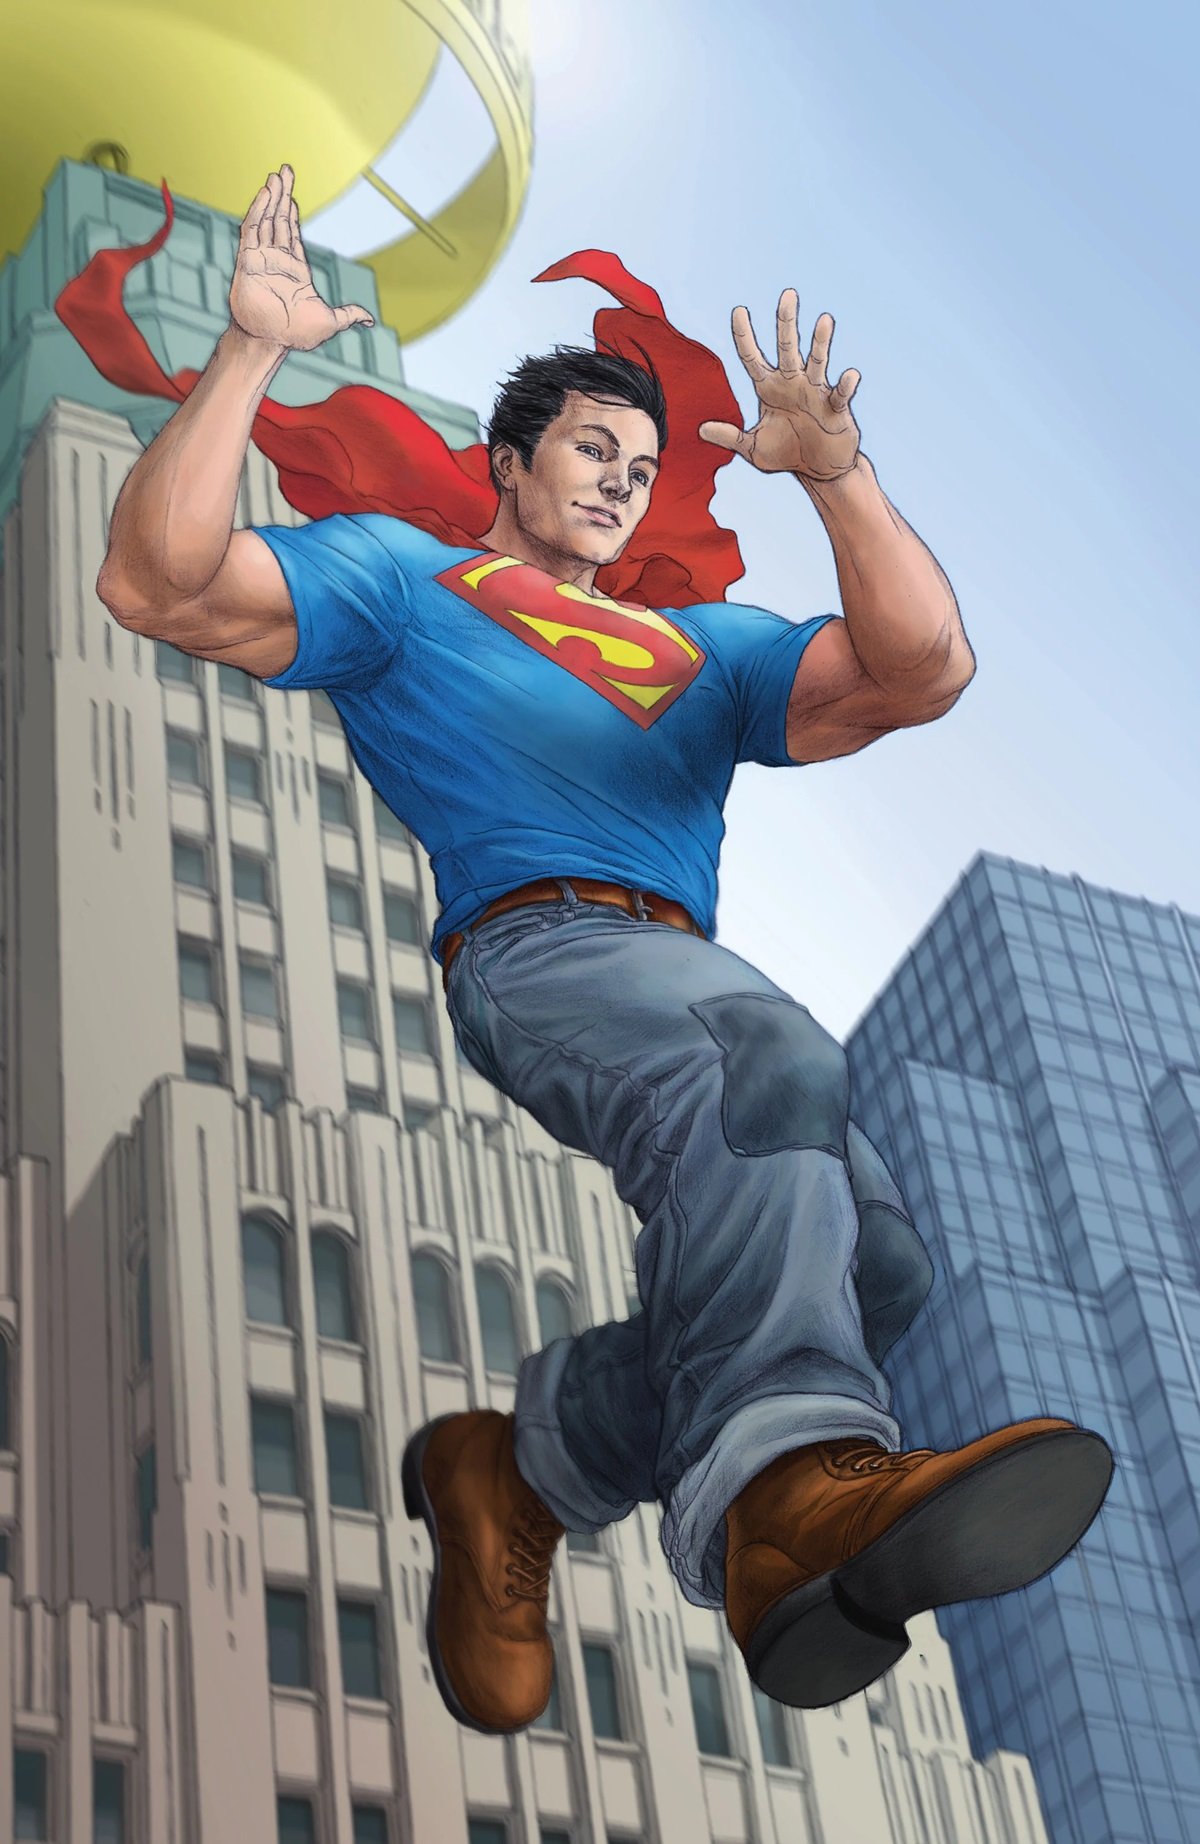 The young New 52 era Superman from Action Comics (2011). Art by Michael Choi.